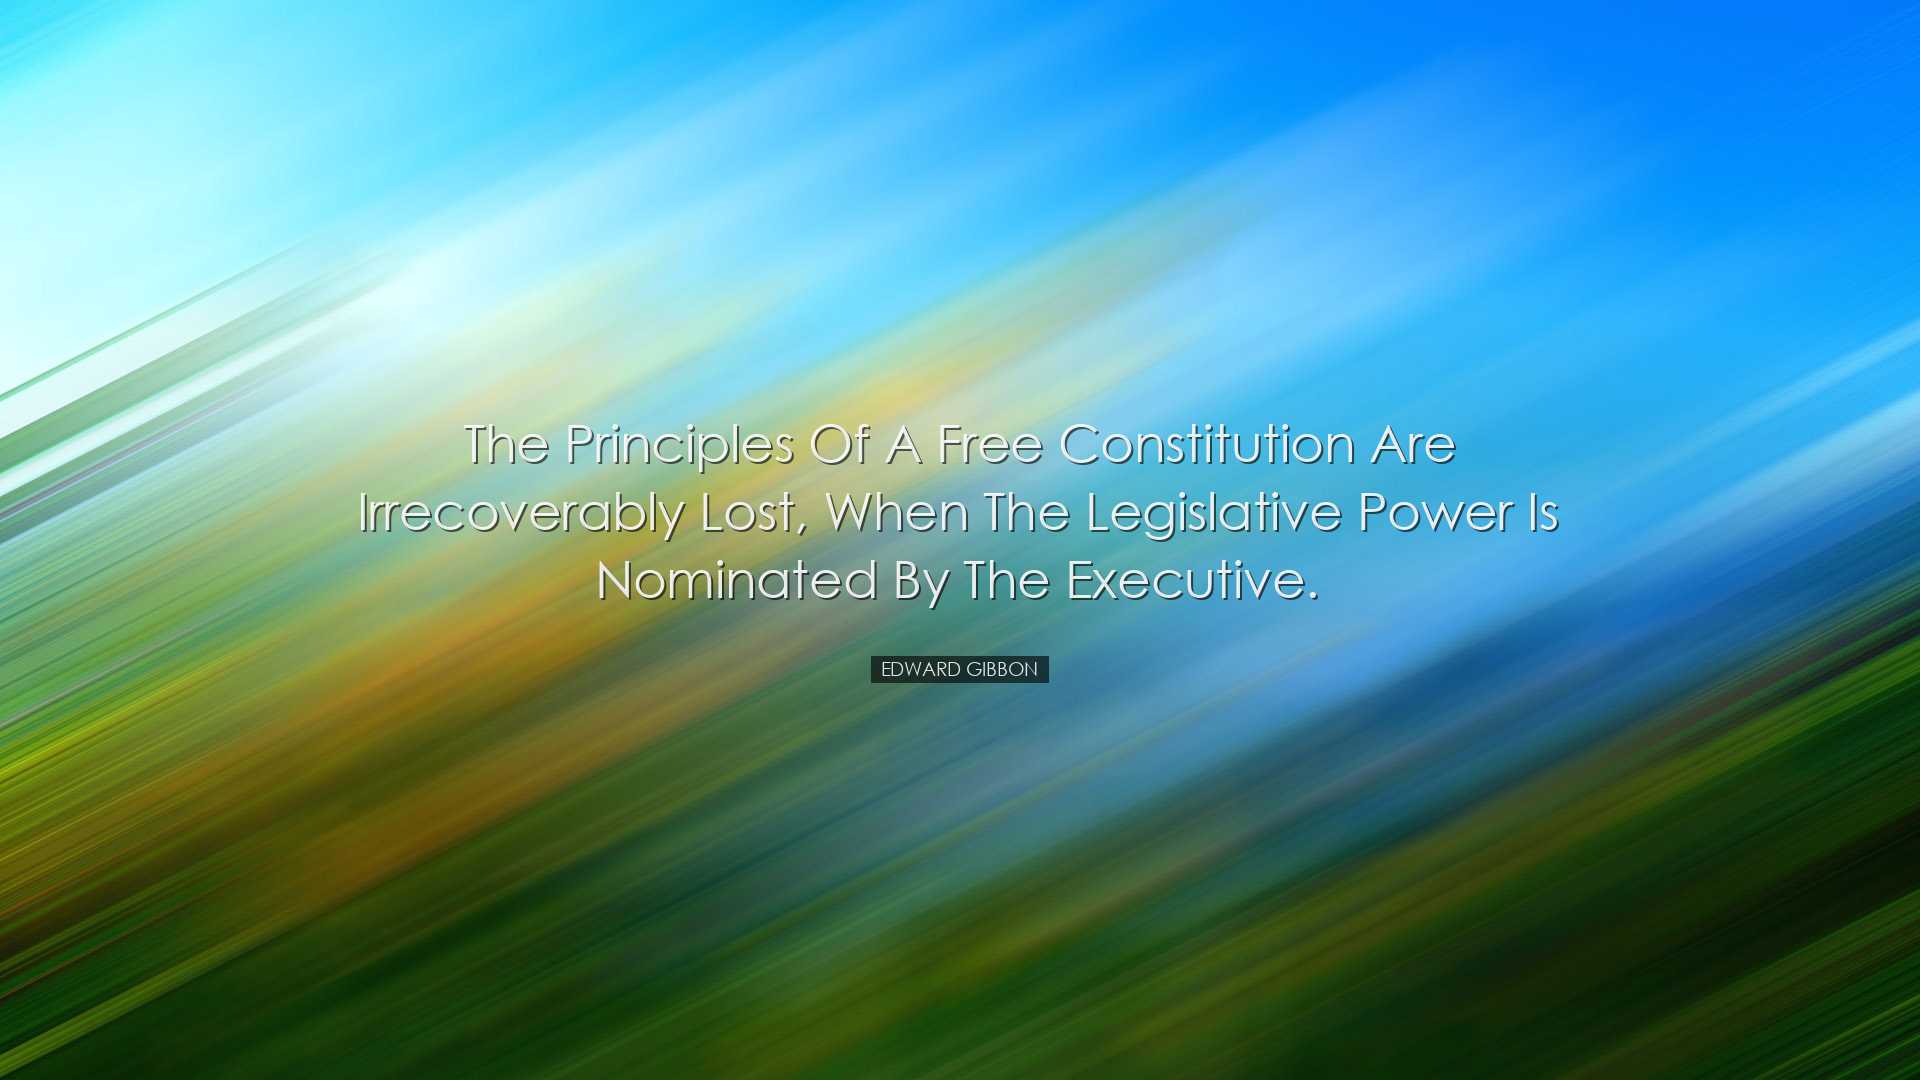 The principles of a free constitution are irrecoverably lost, when